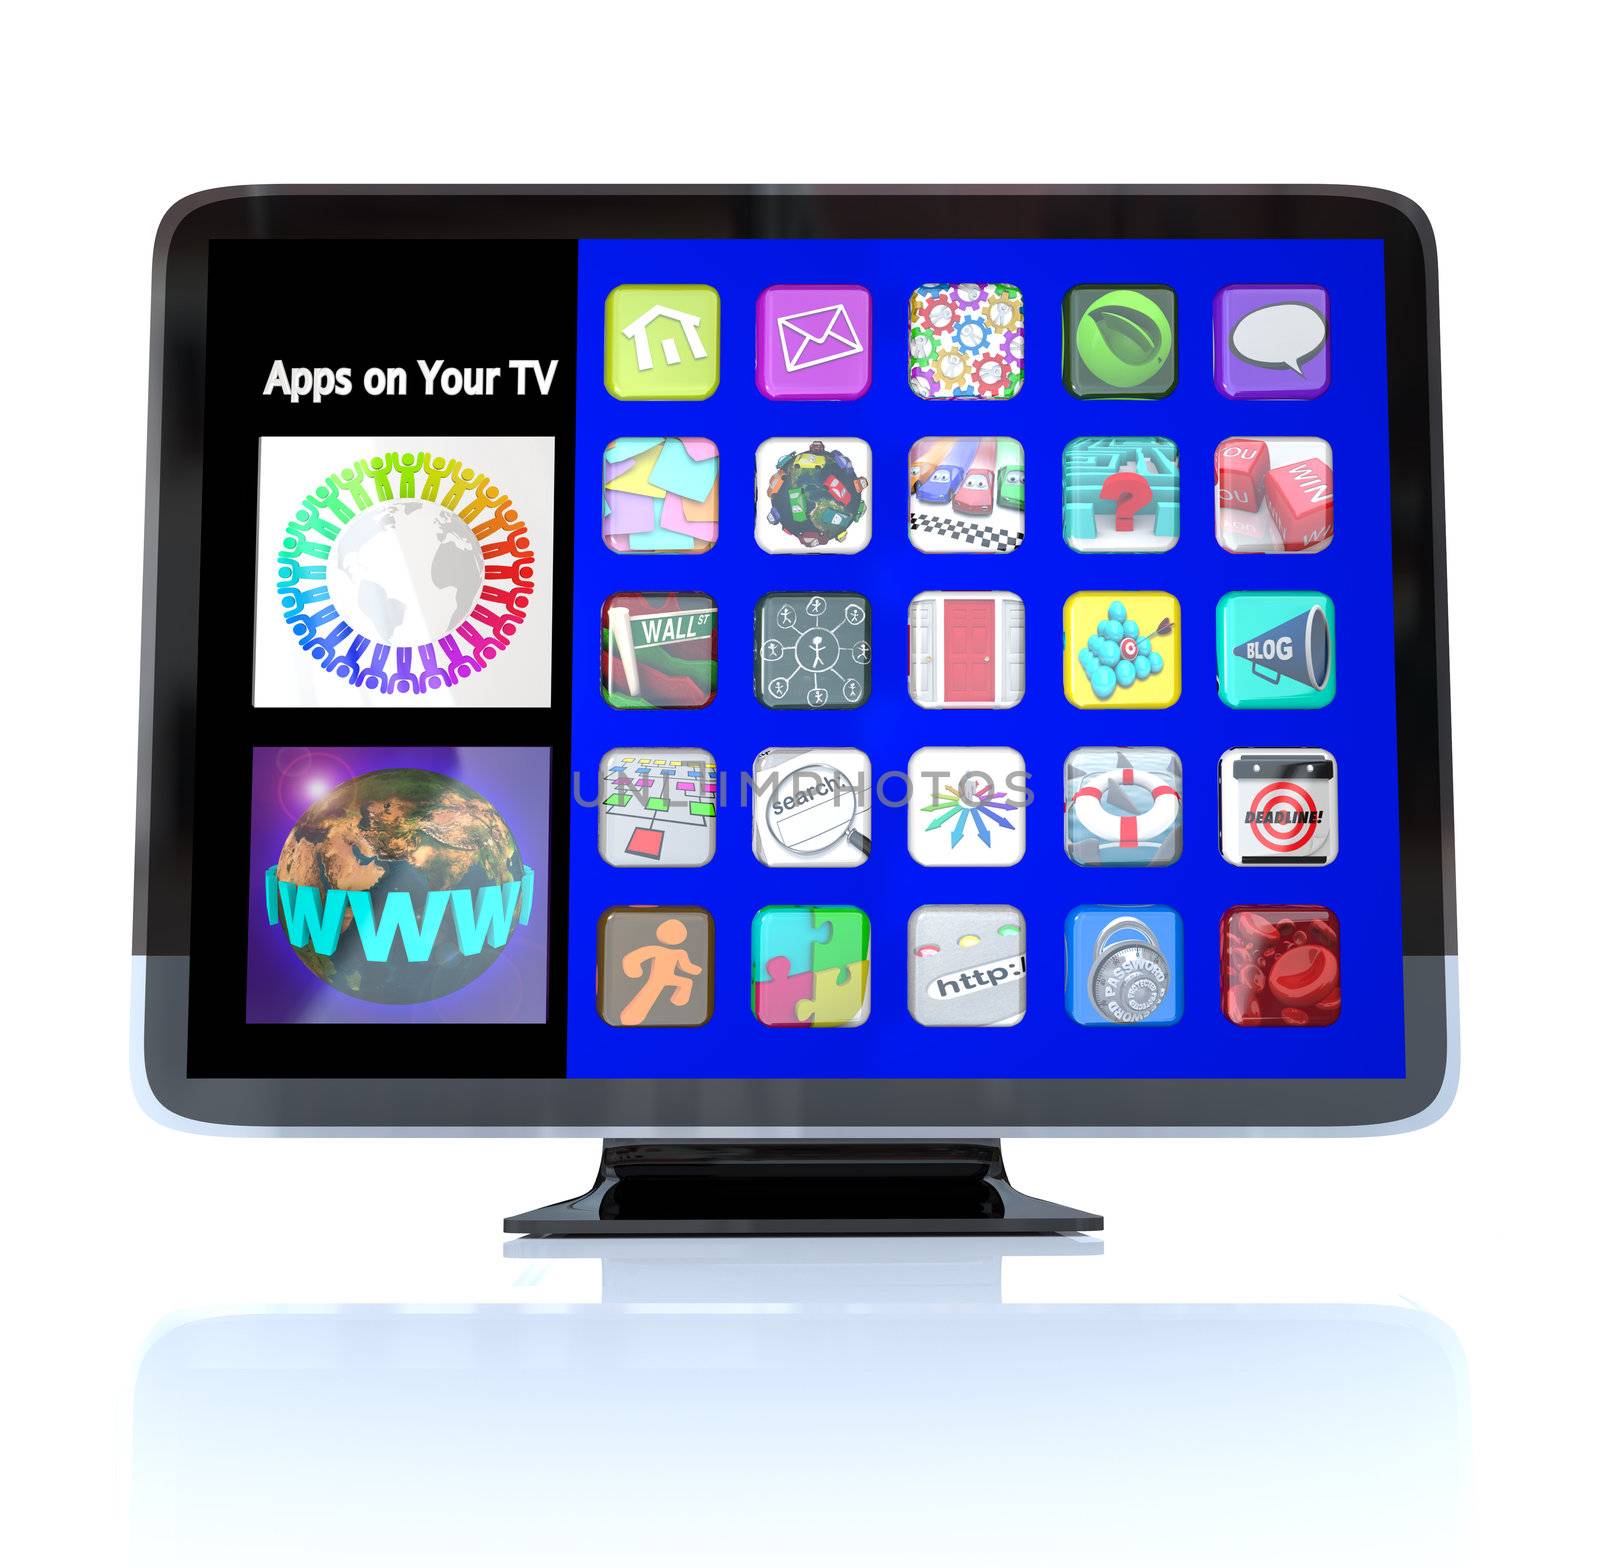 A HDTV television with a menu of application app icons on screen representing a wide range of options for watching entertainment or some form of multimedia